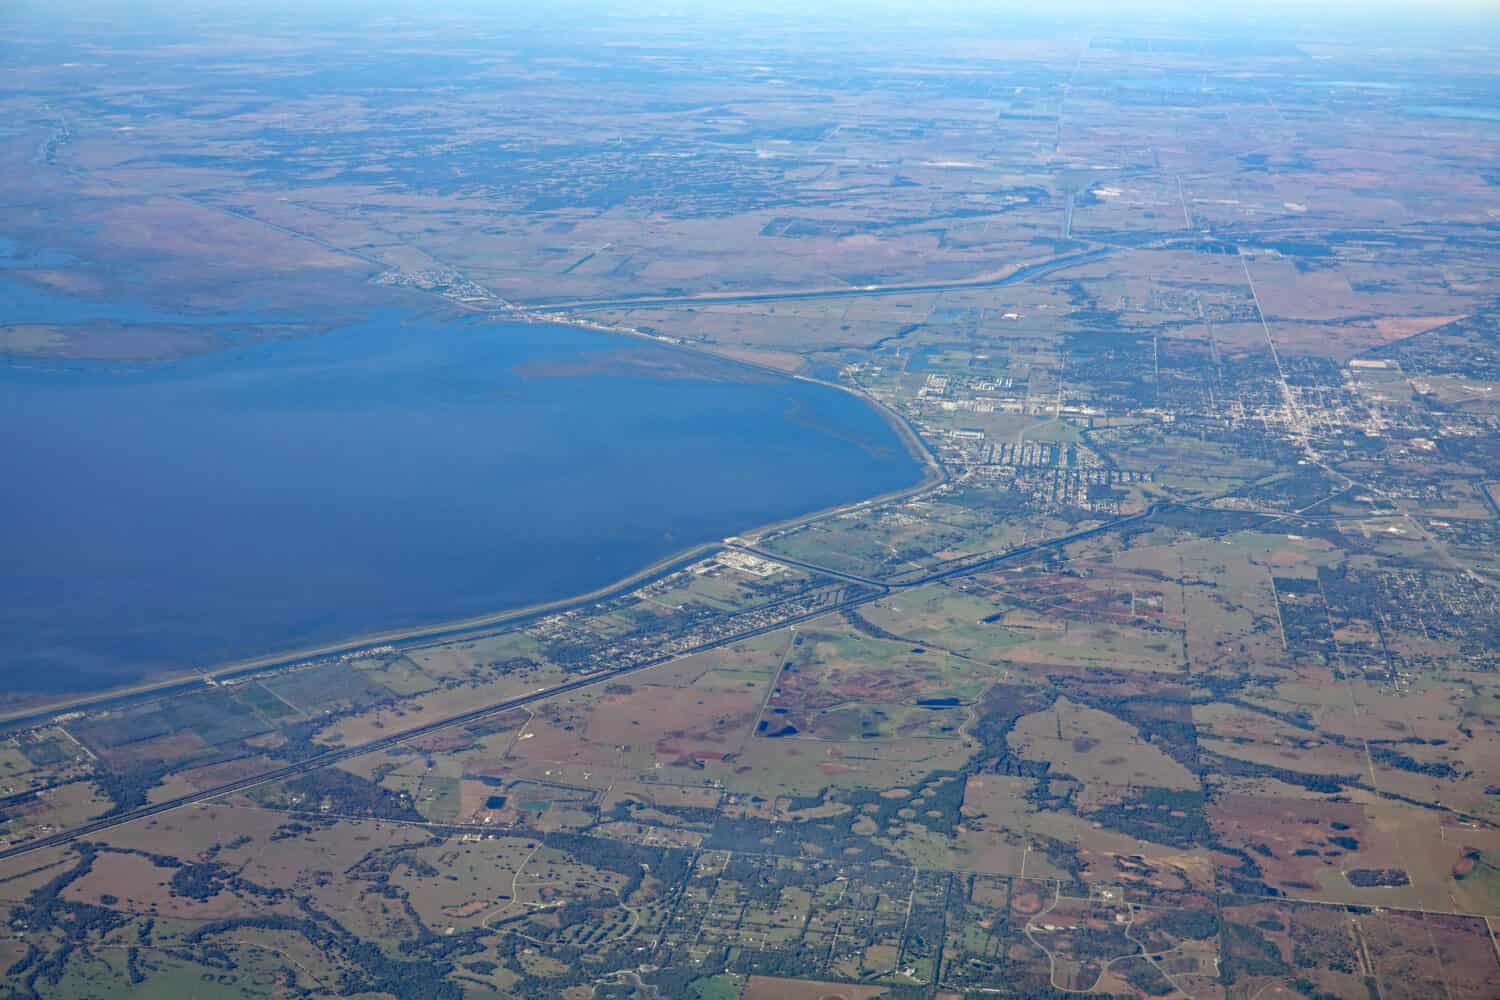 Aerial view of the town of Okeechobee, on the north shore of Lake Okeechobee, with the Kissimmee River flowing into the lake, causing algae pollution.